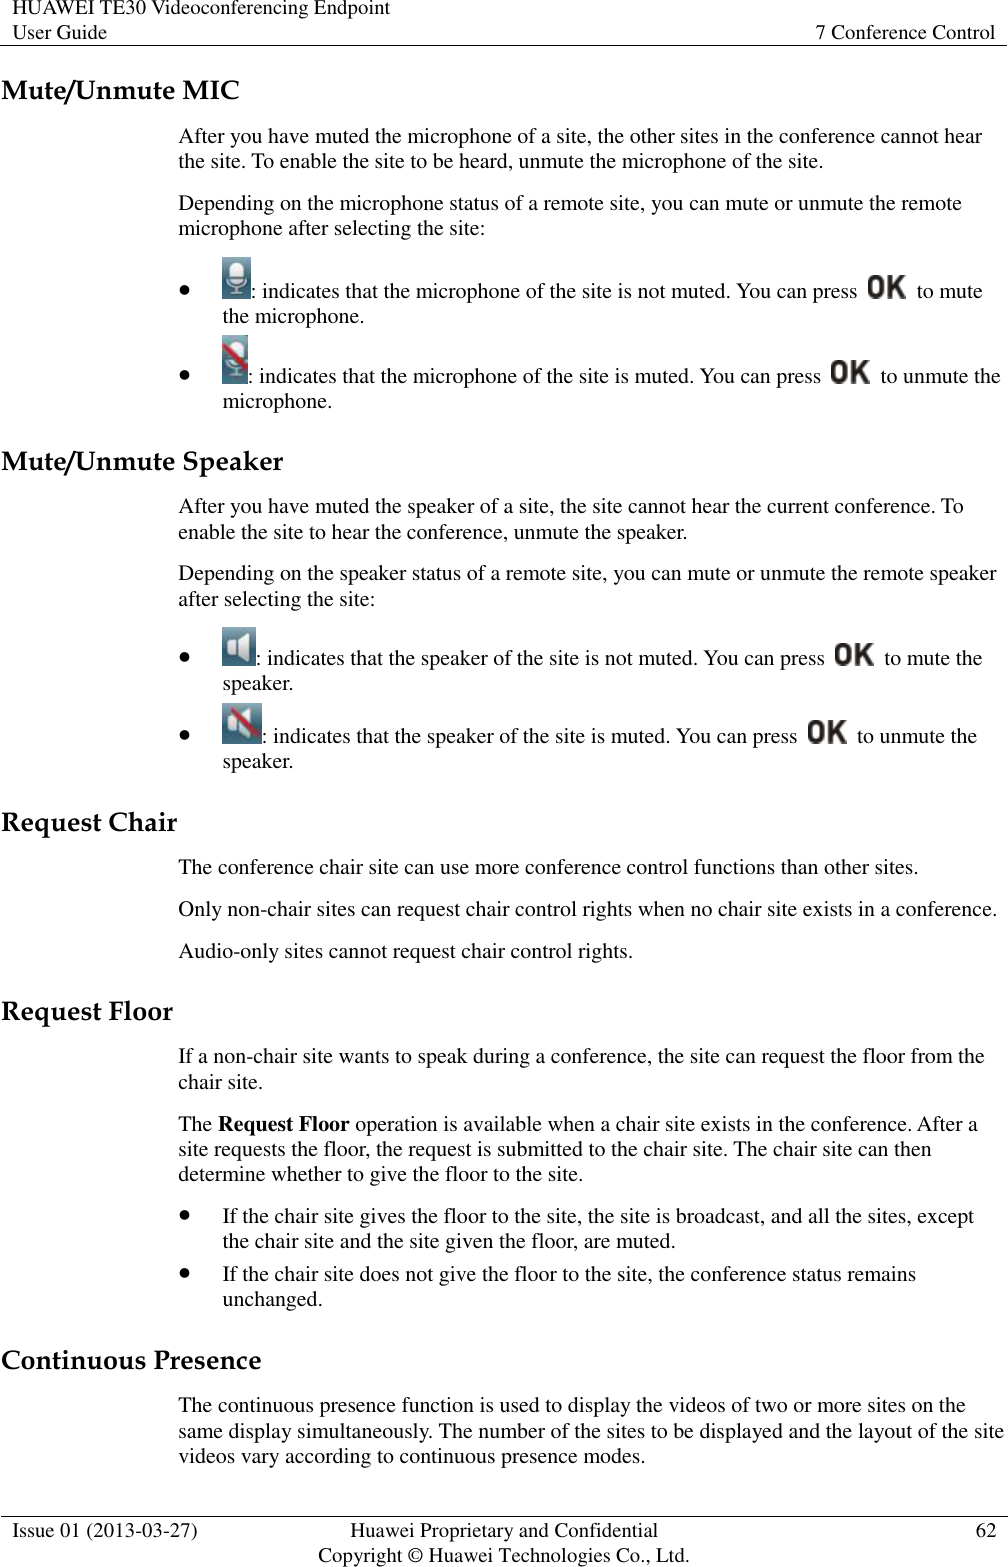 HUAWEI TE30 Videoconferencing Endpoint User Guide 7 Conference Control  Issue 01 (2013-03-27) Huawei Proprietary and Confidential                                     Copyright © Huawei Technologies Co., Ltd. 62  Mute/Unmute MIC After you have muted the microphone of a site, the other sites in the conference cannot hear the site. To enable the site to be heard, unmute the microphone of the site. Depending on the microphone status of a remote site, you can mute or unmute the remote microphone after selecting the site:  : indicates that the microphone of the site is not muted. You can press    to mute the microphone.  : indicates that the microphone of the site is muted. You can press    to unmute the microphone. Mute/Unmute Speaker After you have muted the speaker of a site, the site cannot hear the current conference. To enable the site to hear the conference, unmute the speaker. Depending on the speaker status of a remote site, you can mute or unmute the remote speaker after selecting the site:  : indicates that the speaker of the site is not muted. You can press    to mute the speaker.  : indicates that the speaker of the site is muted. You can press    to unmute the speaker. Request Chair The conference chair site can use more conference control functions than other sites.   Only non-chair sites can request chair control rights when no chair site exists in a conference.   Audio-only sites cannot request chair control rights. Request Floor If a non-chair site wants to speak during a conference, the site can request the floor from the chair site. The Request Floor operation is available when a chair site exists in the conference. After a site requests the floor, the request is submitted to the chair site. The chair site can then determine whether to give the floor to the site.  If the chair site gives the floor to the site, the site is broadcast, and all the sites, except the chair site and the site given the floor, are muted.  If the chair site does not give the floor to the site, the conference status remains unchanged. Continuous Presence The continuous presence function is used to display the videos of two or more sites on the same display simultaneously. The number of the sites to be displayed and the layout of the site videos vary according to continuous presence modes. 